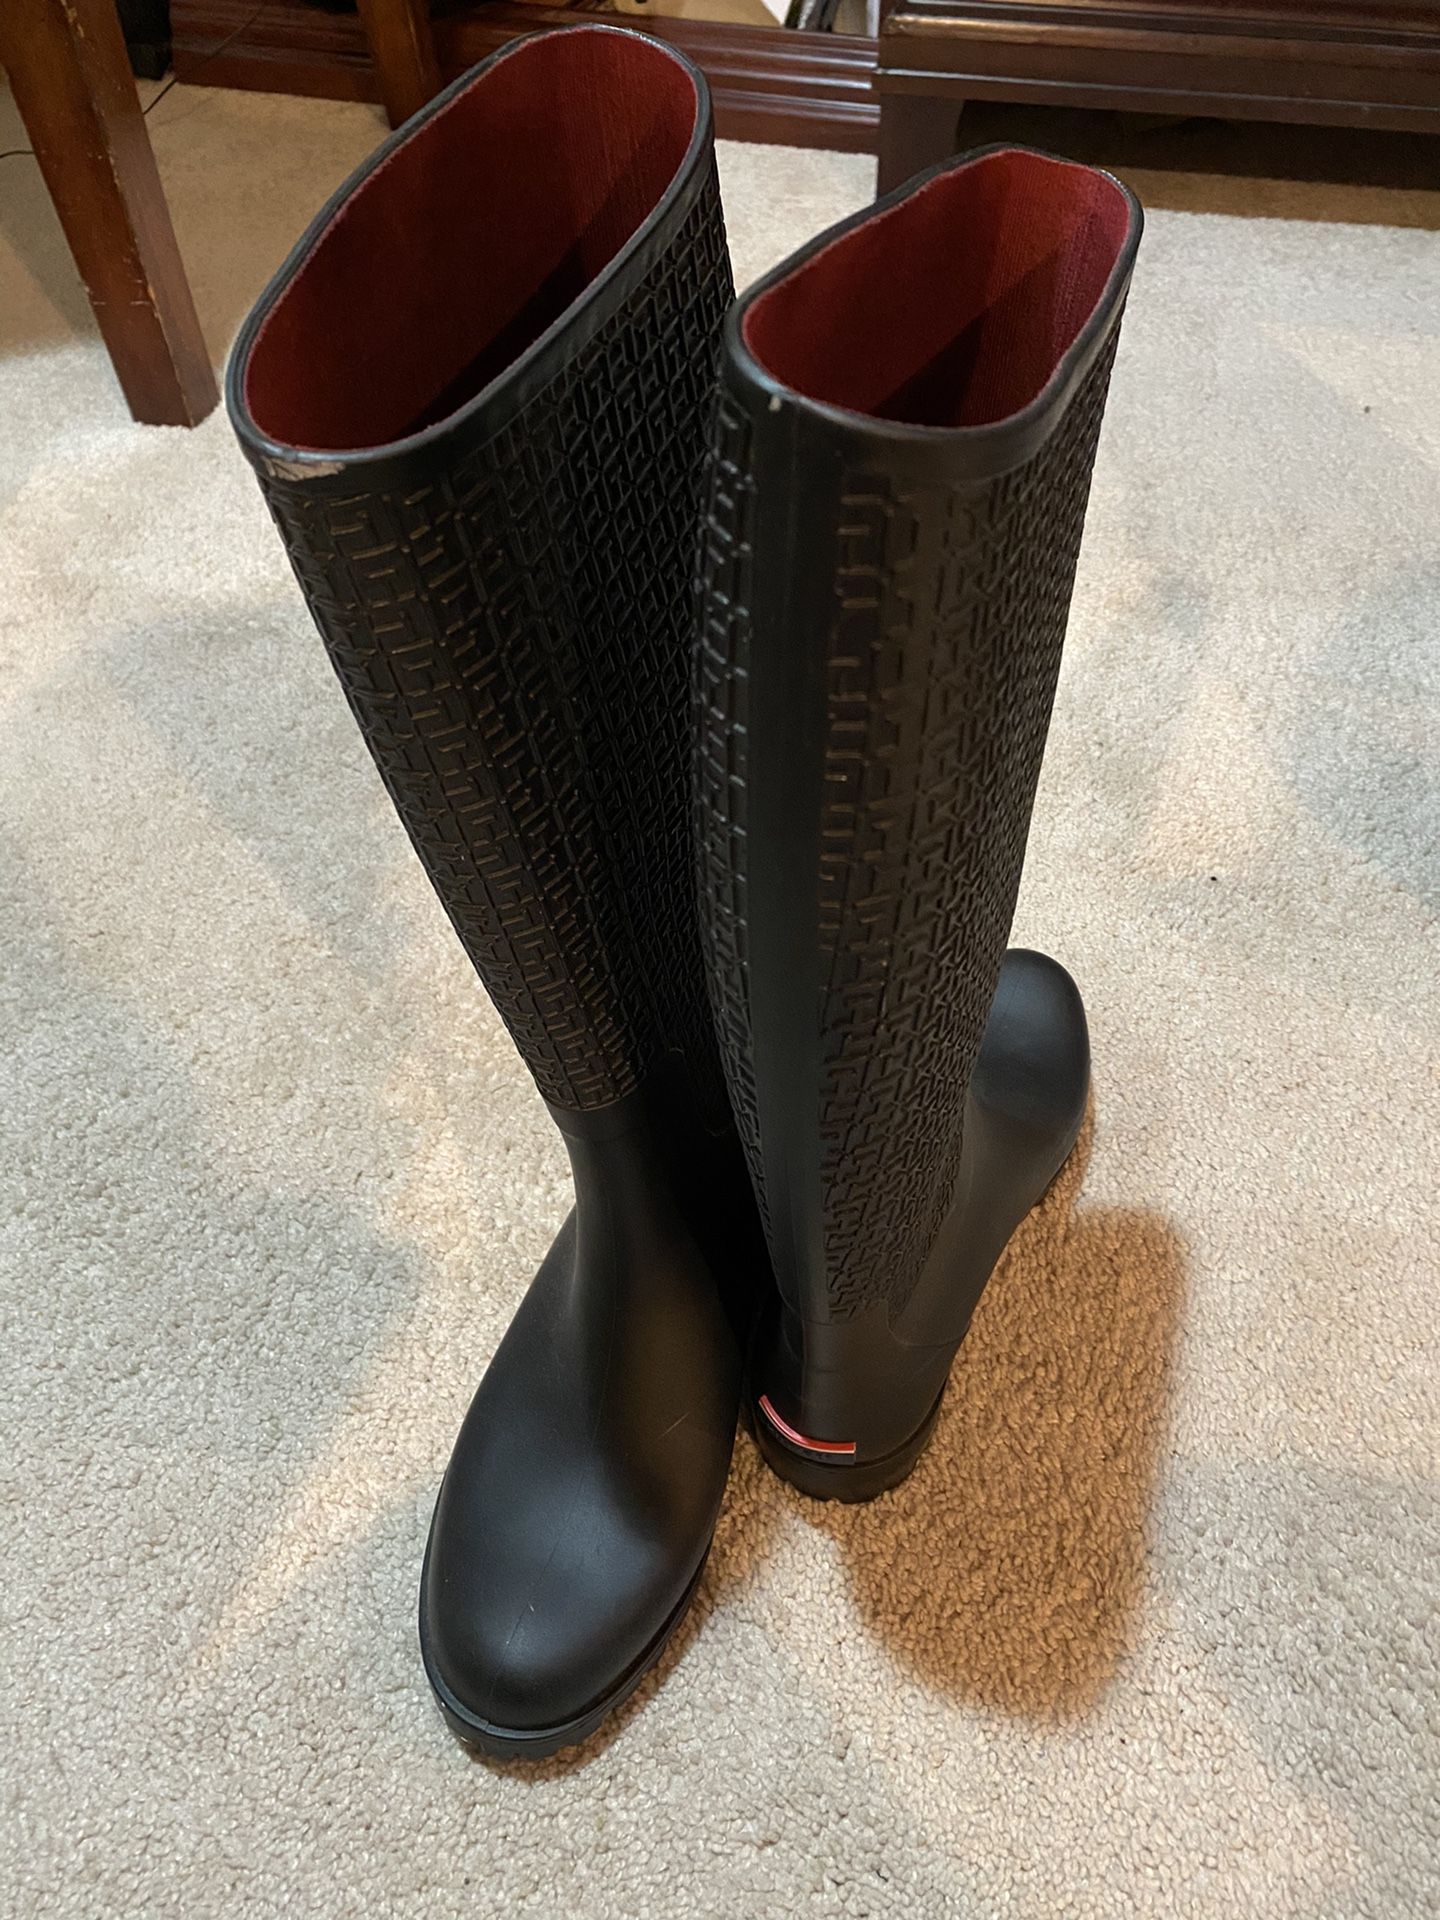 Tommy Rain boots size 10